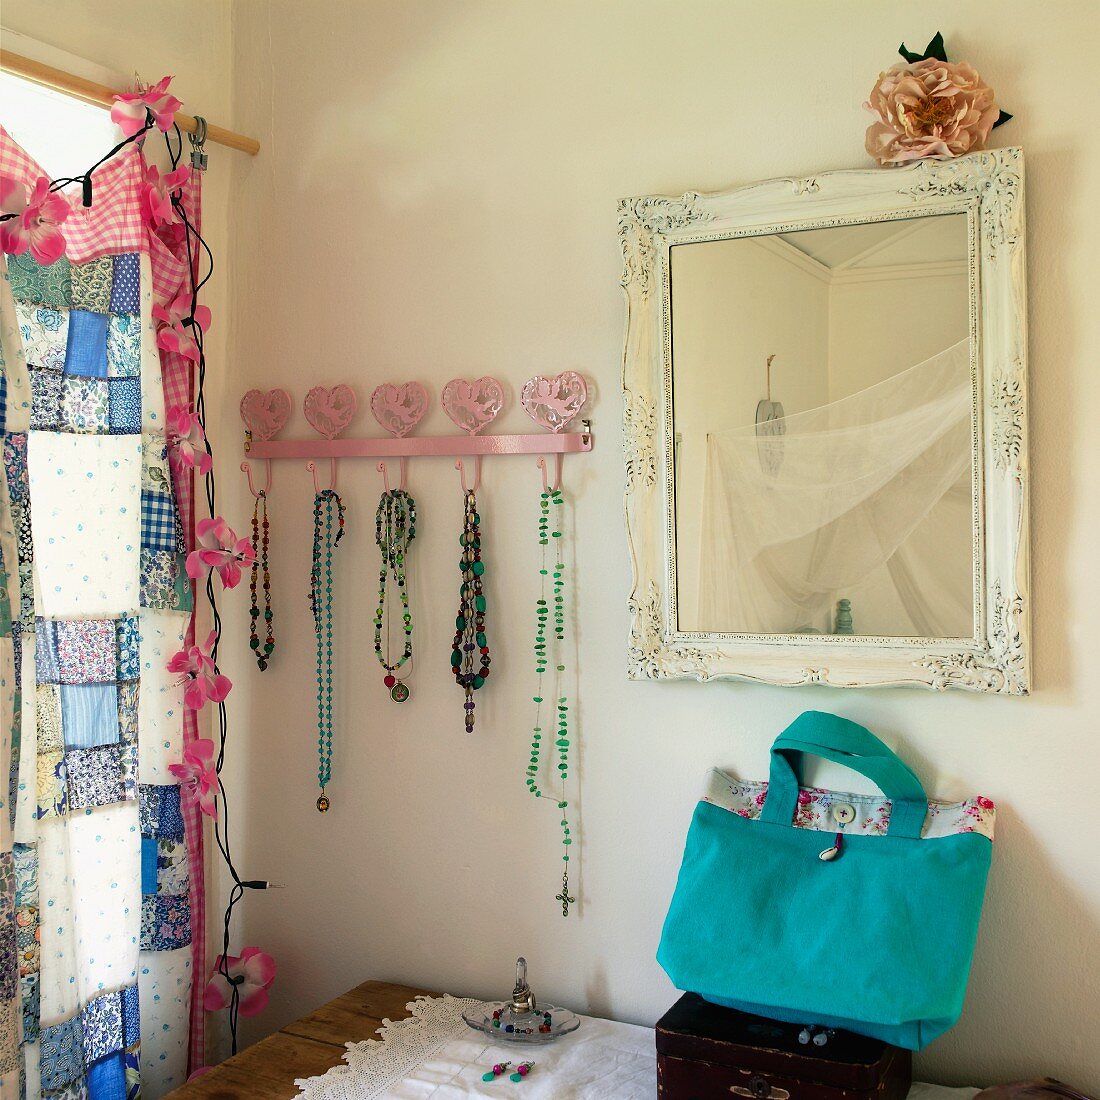 Vintage mirror and strings of beads on pink coat rack with heart motif next to window with patchwork curtain and garland of floral fairy lights